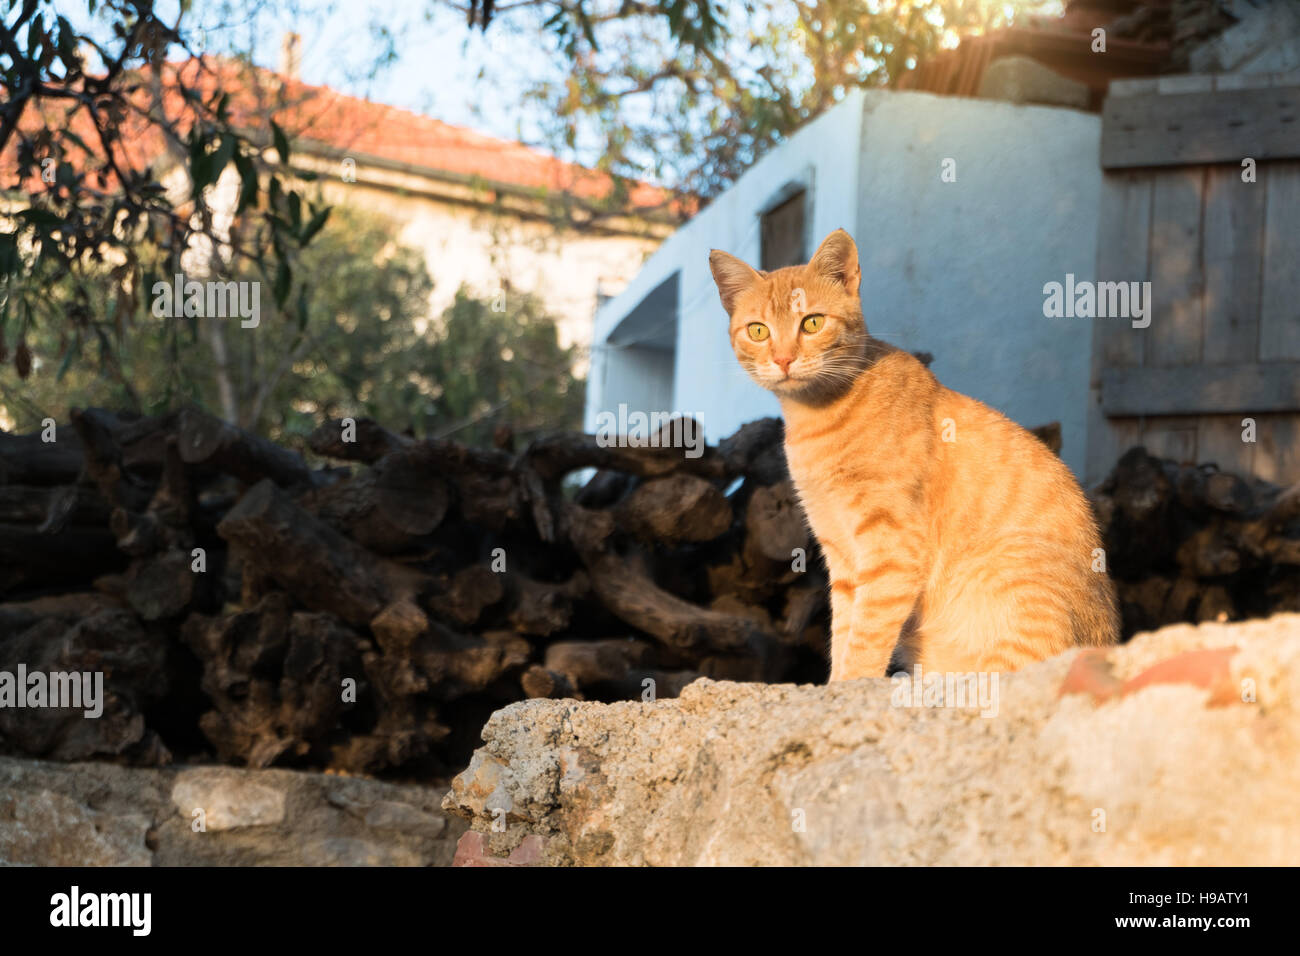 Brown cat of a village on rural area in Turkey Stock Photo